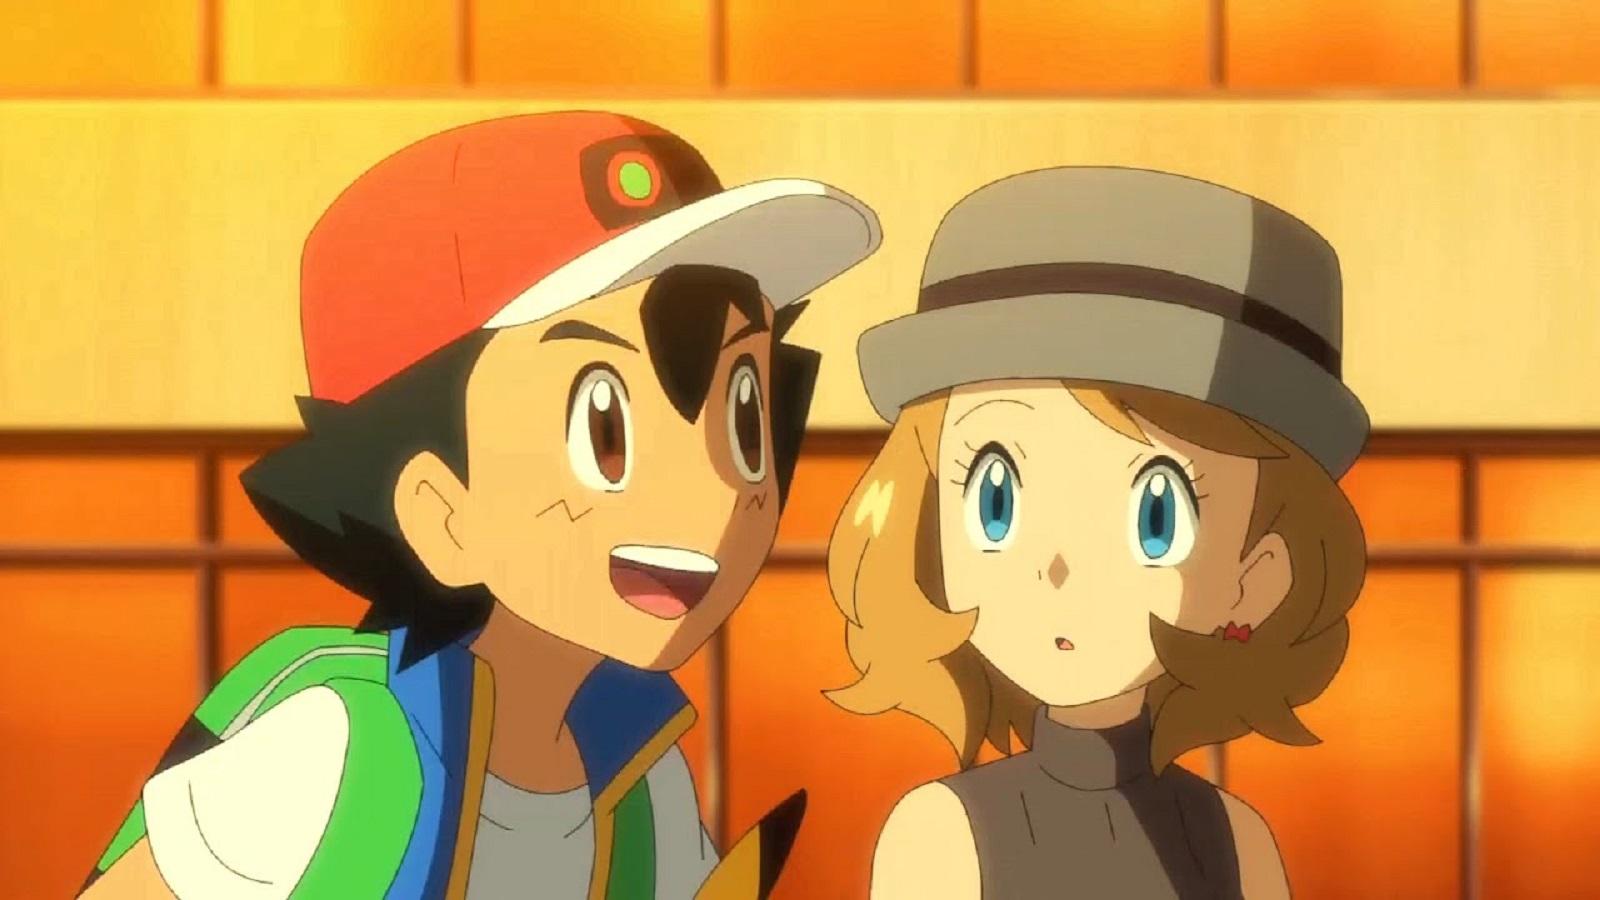 Pokemon fans call Ash's actions in the show “morally ambiguous